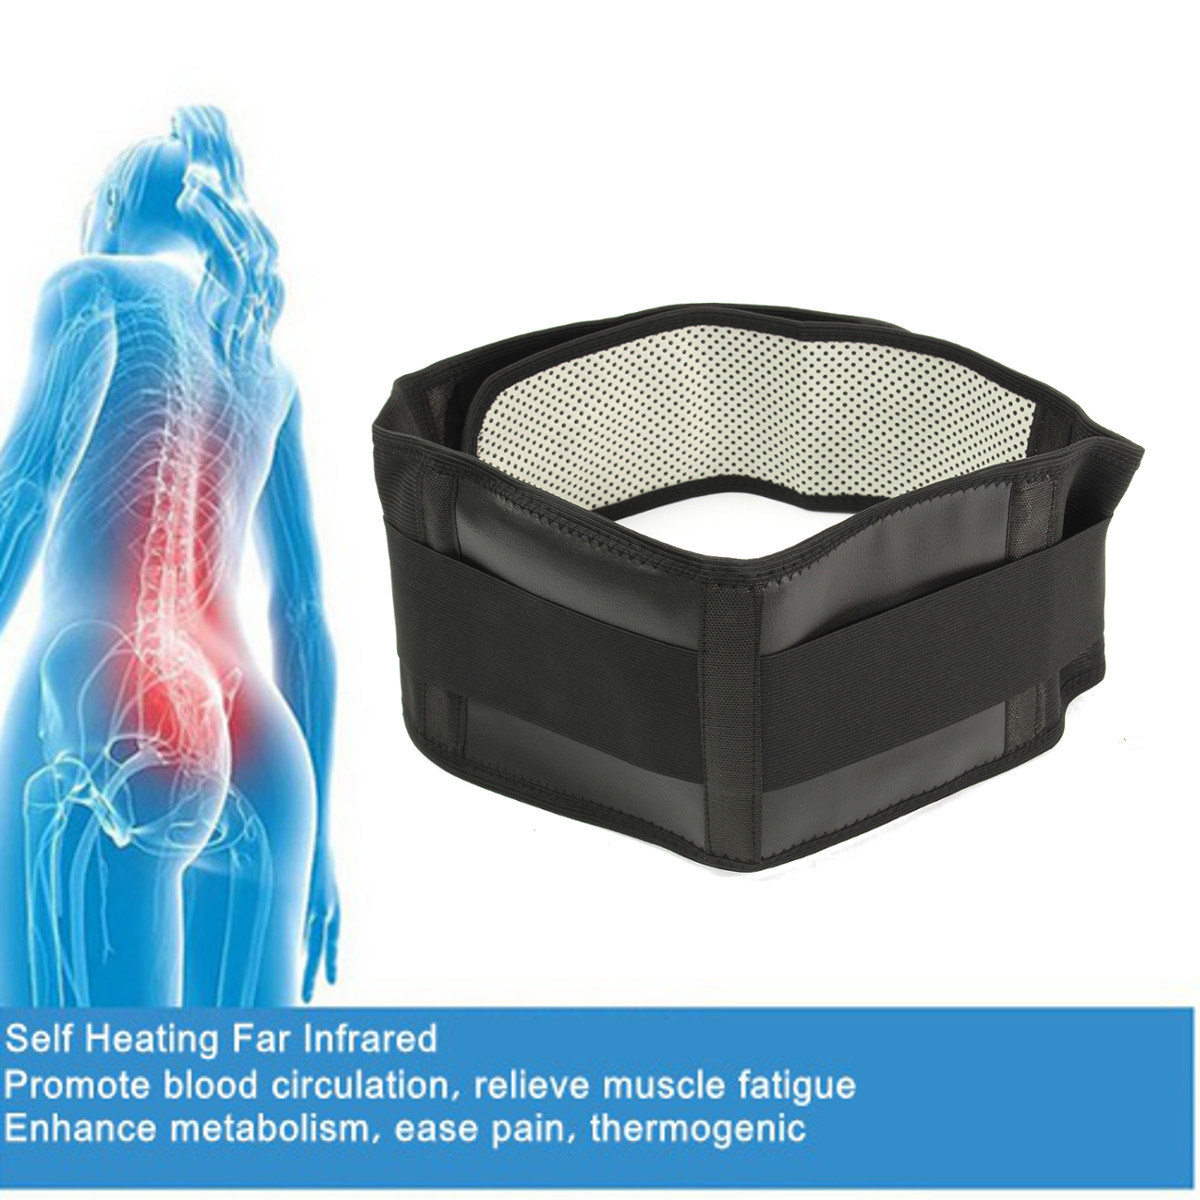 SML-Self-Heating-Infrared-Magnetic-Therapy-Tourmaline-Back-Support-Brace-Lumbar-Belt-1120111-4